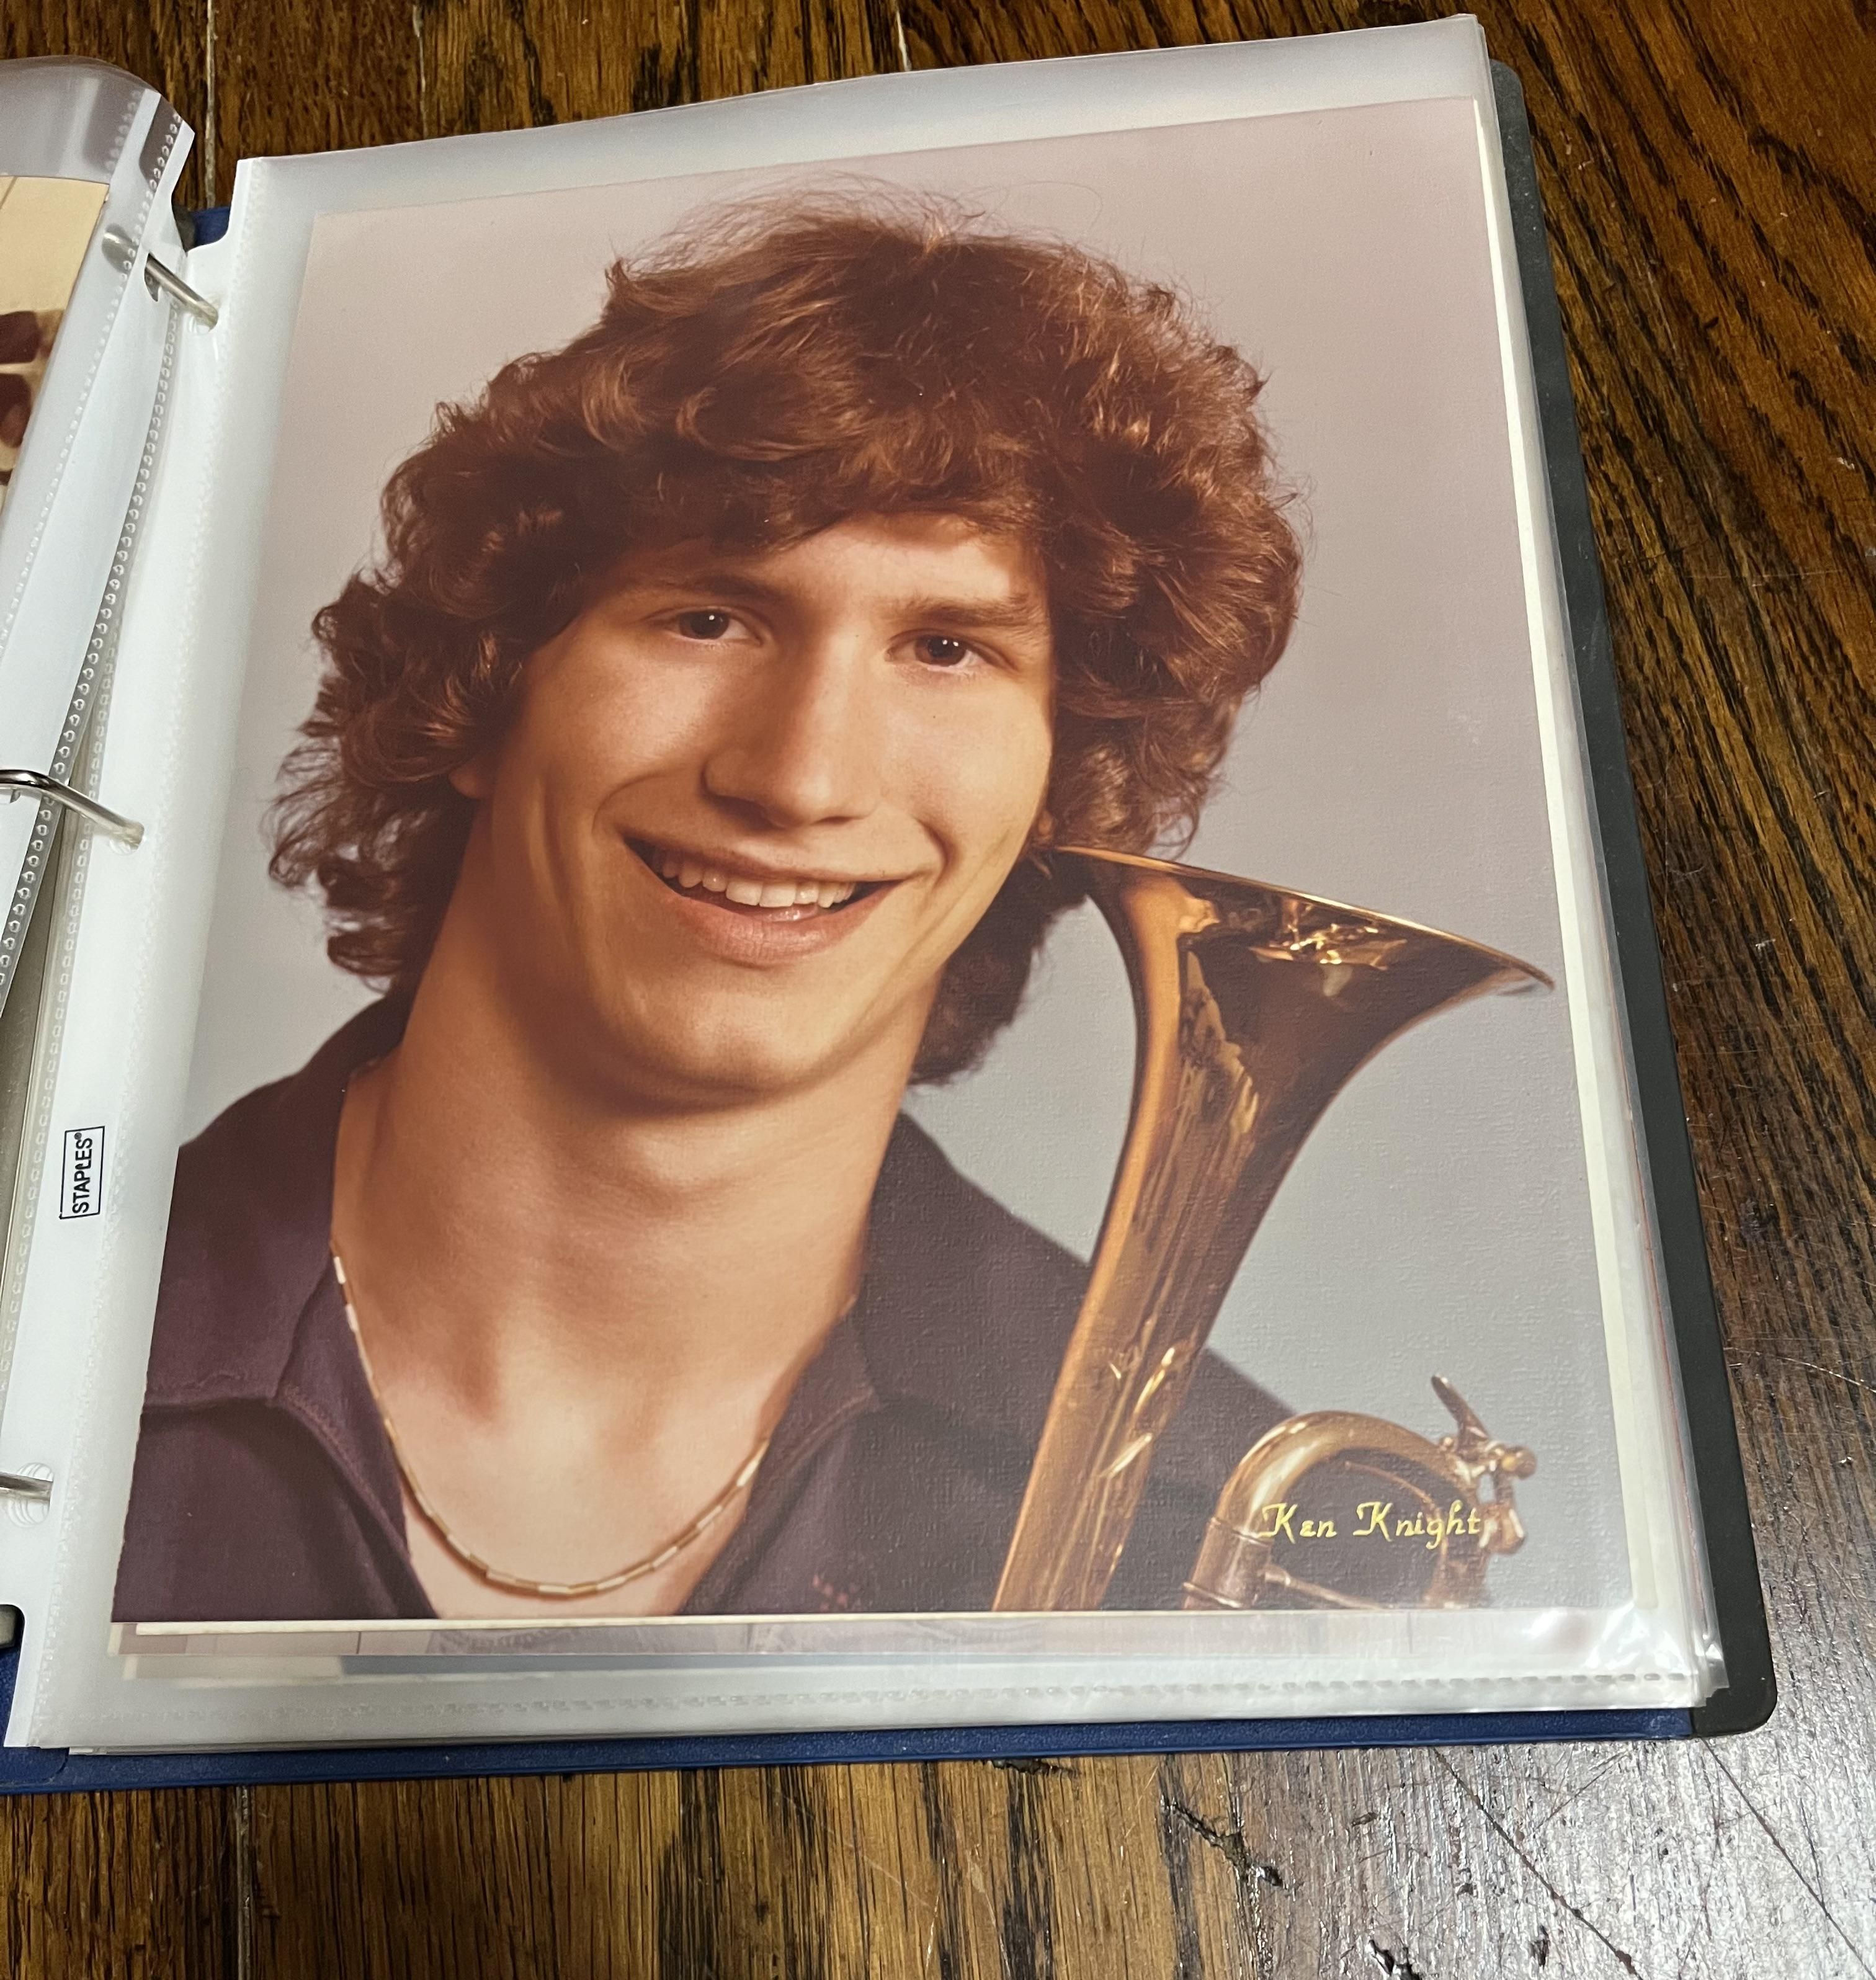 Going through an old family album, apparently my brother looked like Andy Samberg 30 years ago